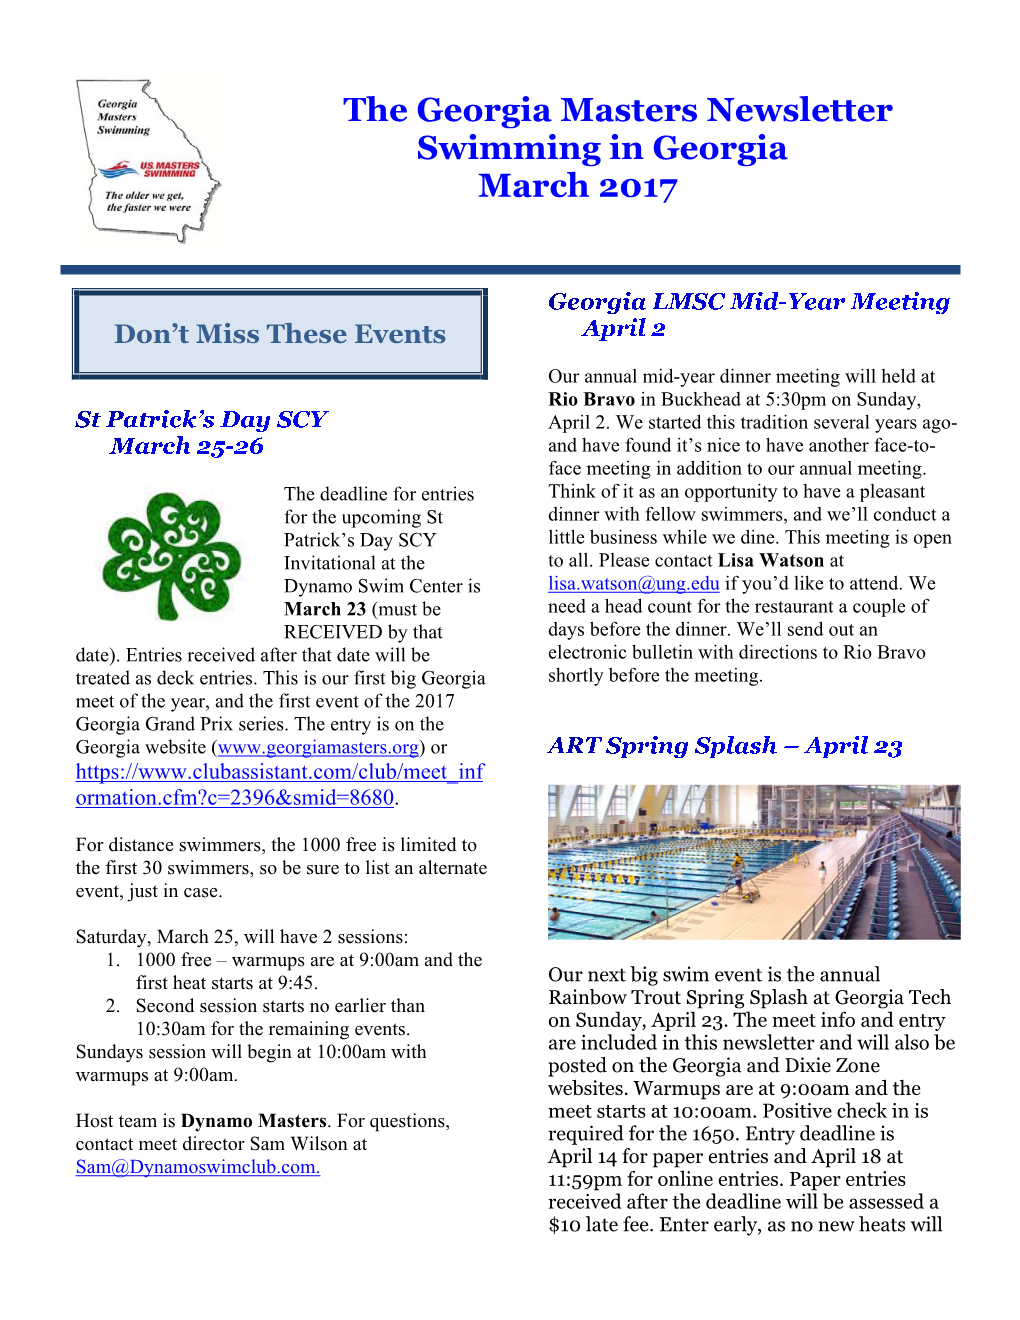 The Georgia Masters Newsletter Swimming in Georgia March 2017